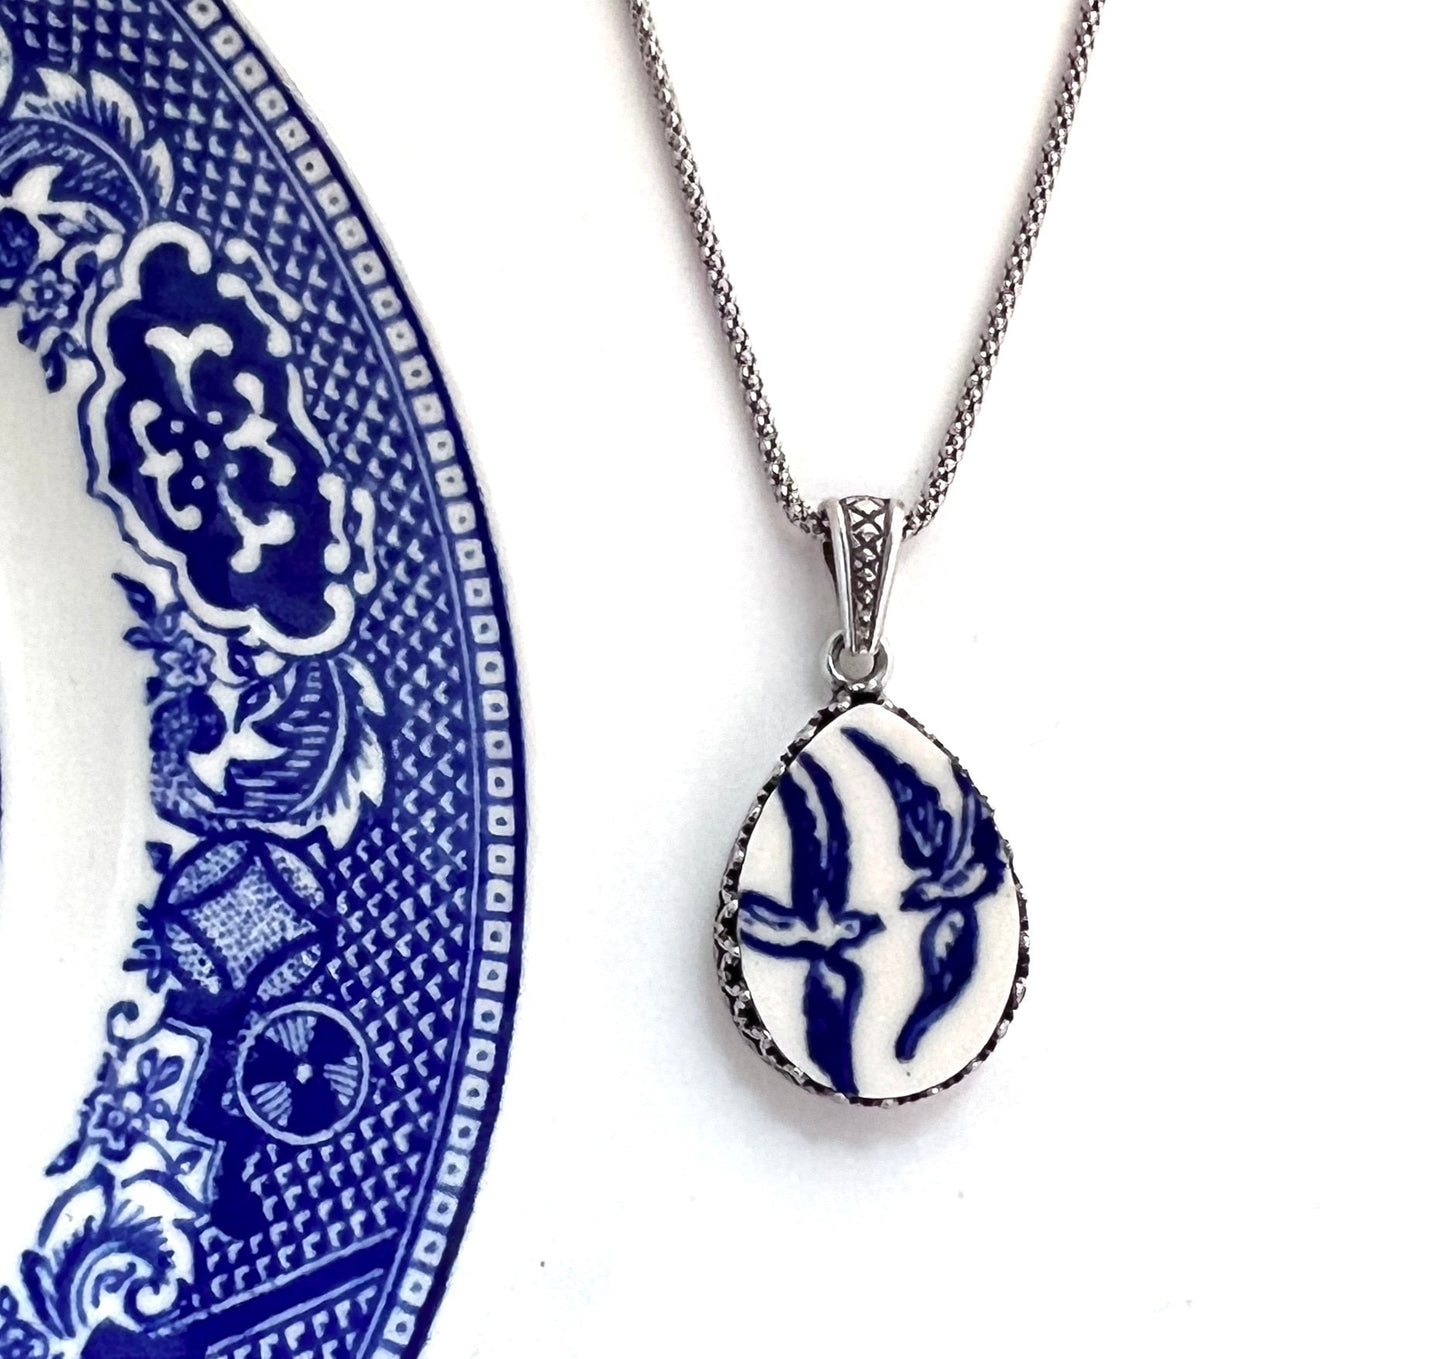 Sterling Silver Love Birds China Necklace, Broken China Jewelry Willow Ware, 20th Anniversary Gift for Wife